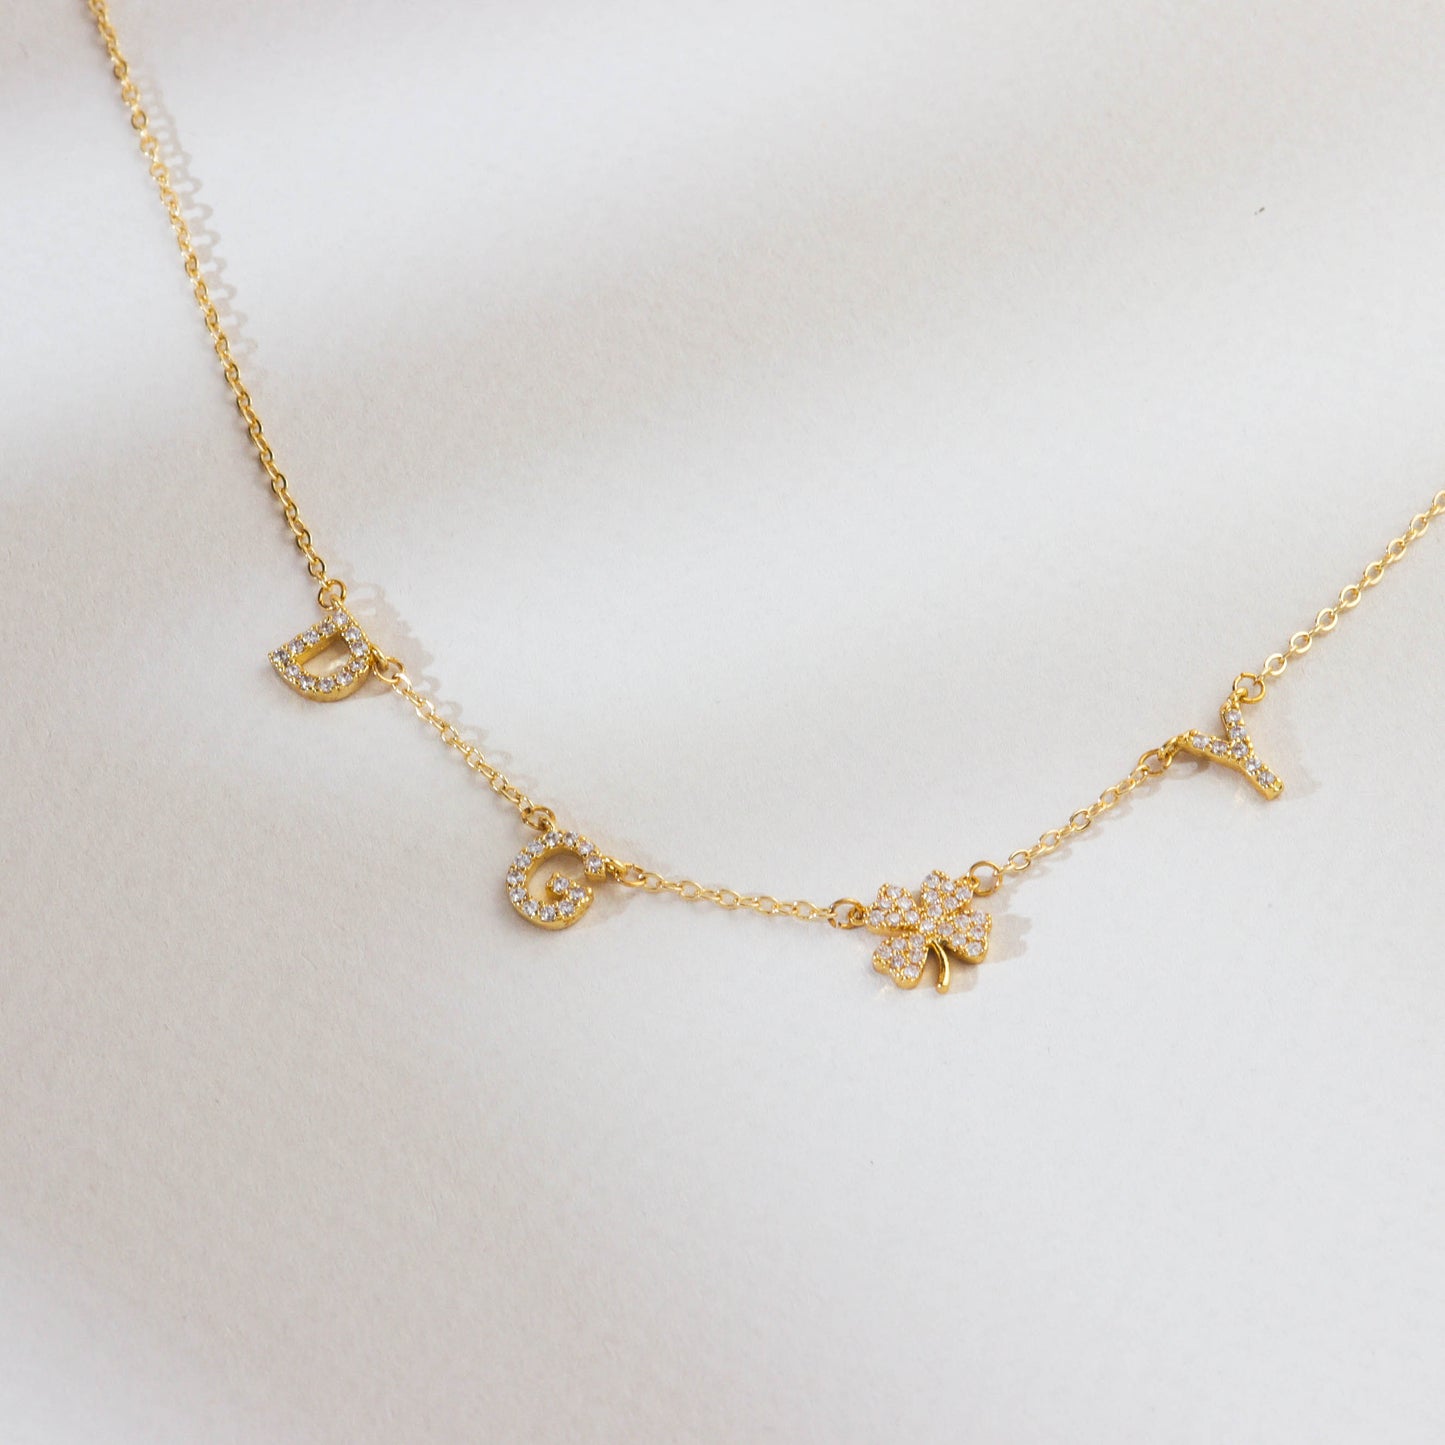 Build Your Initials Necklace